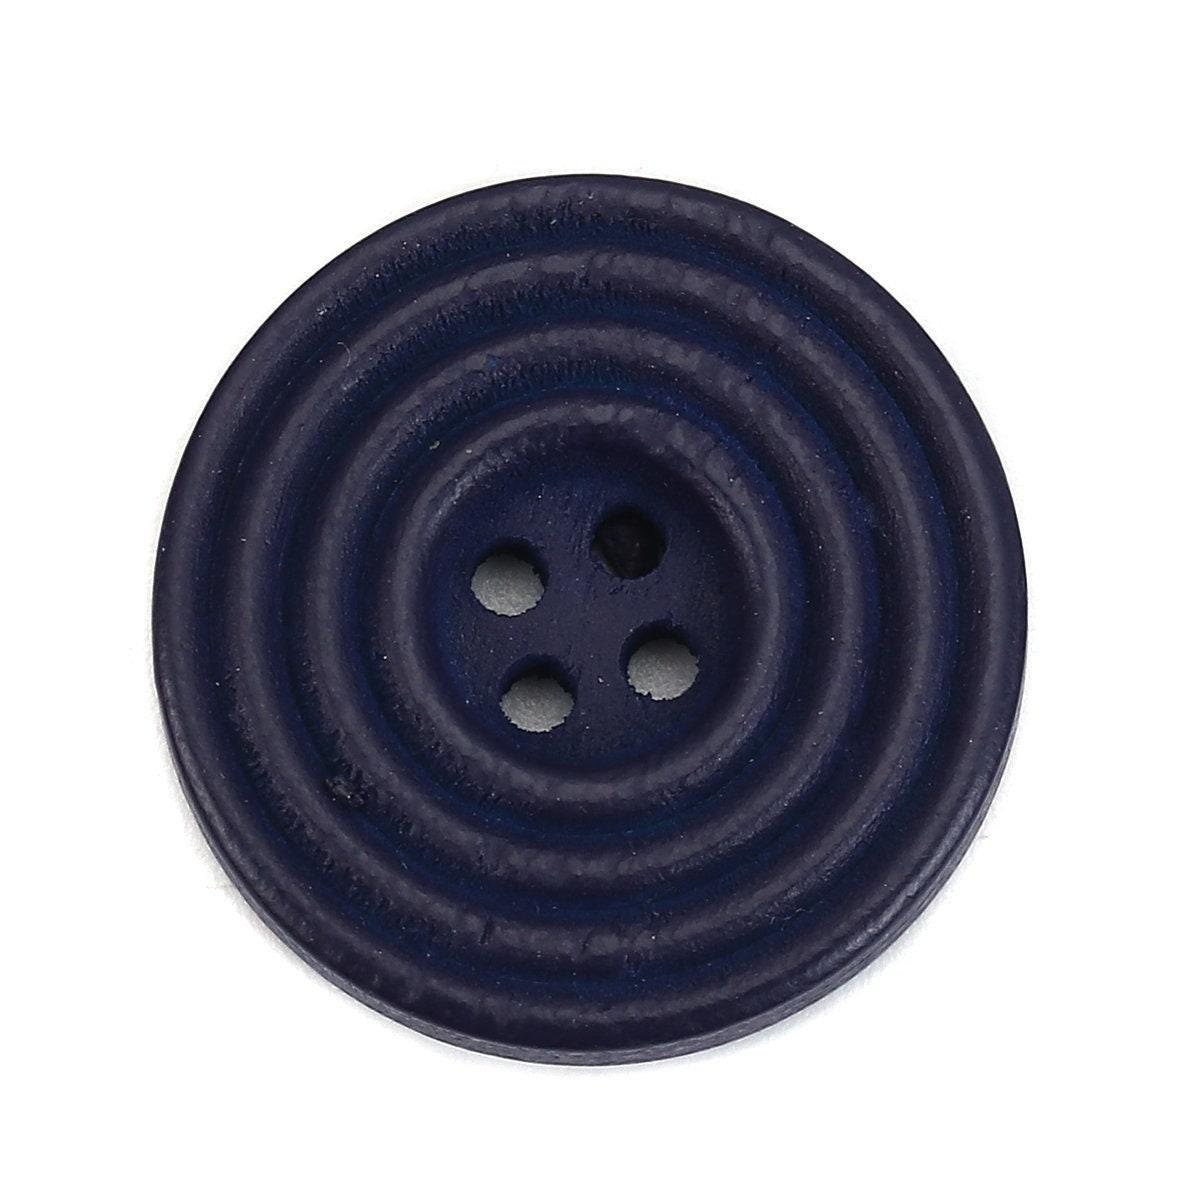 New Large Electric Blue Buttons Big buttons Blue size 1 3/16